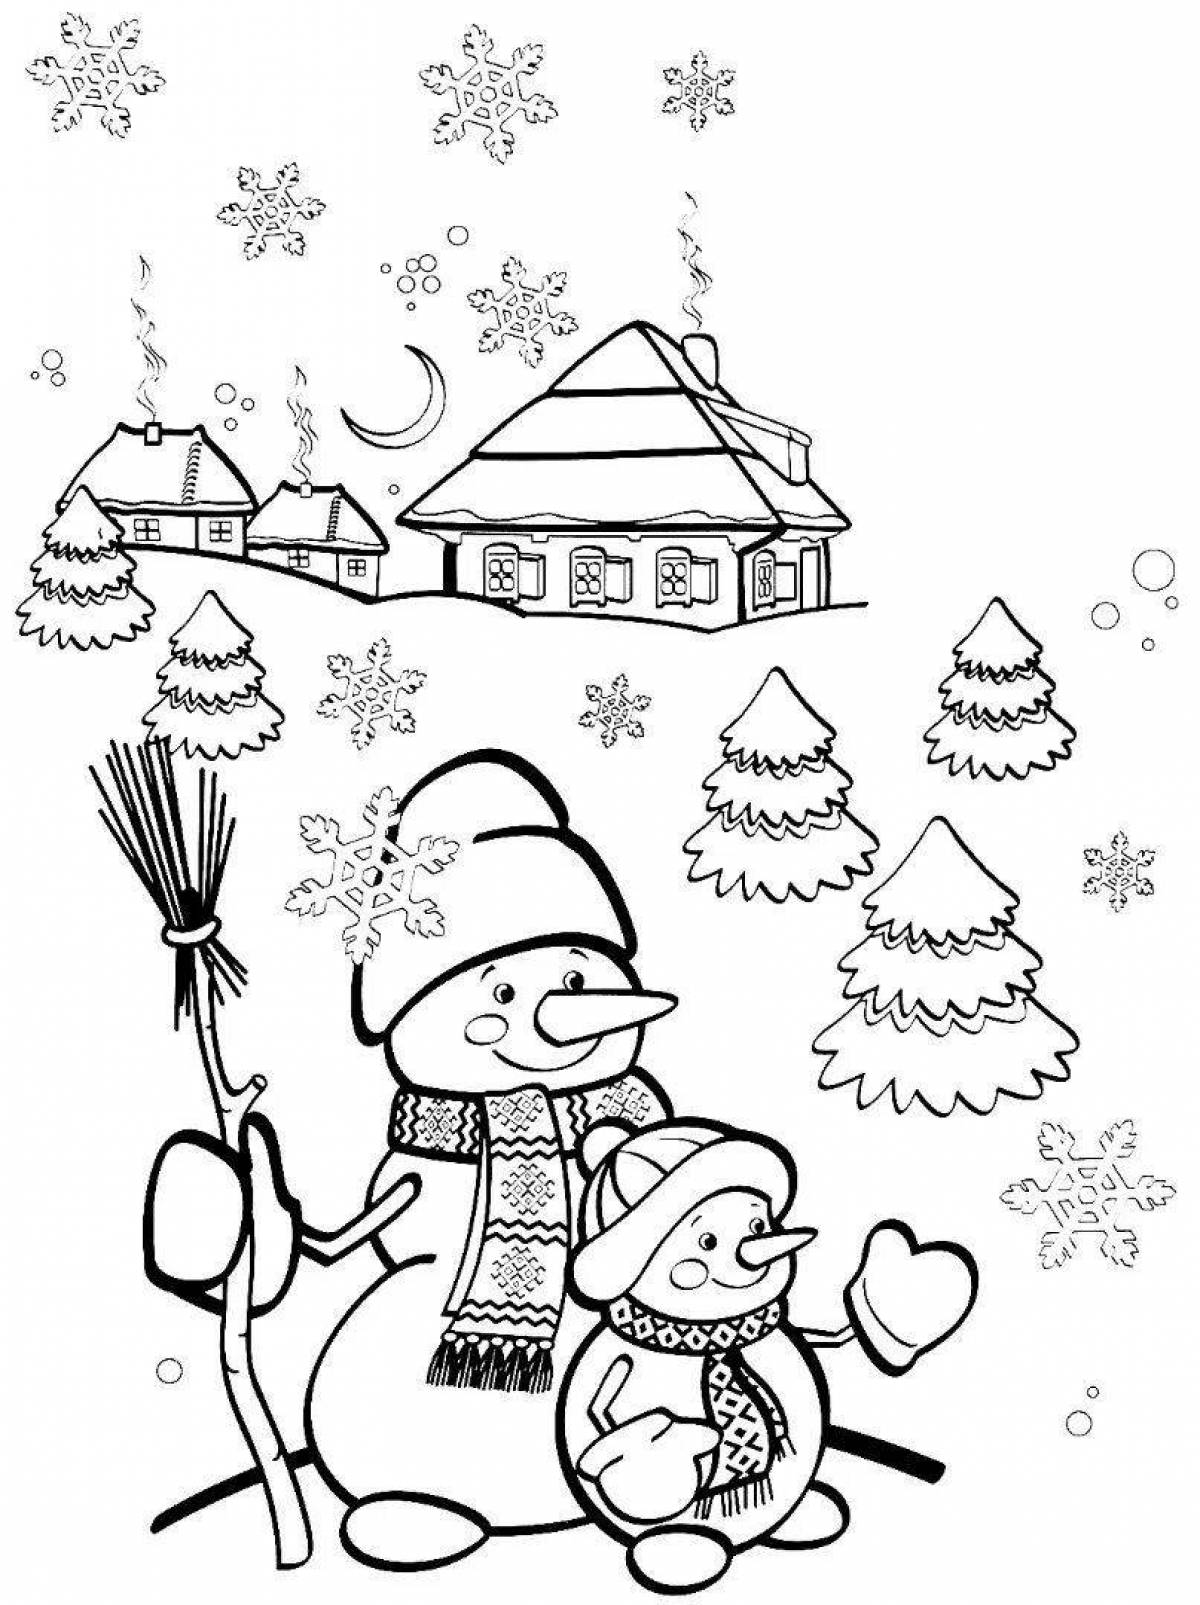 Exciting children's winter coloring book